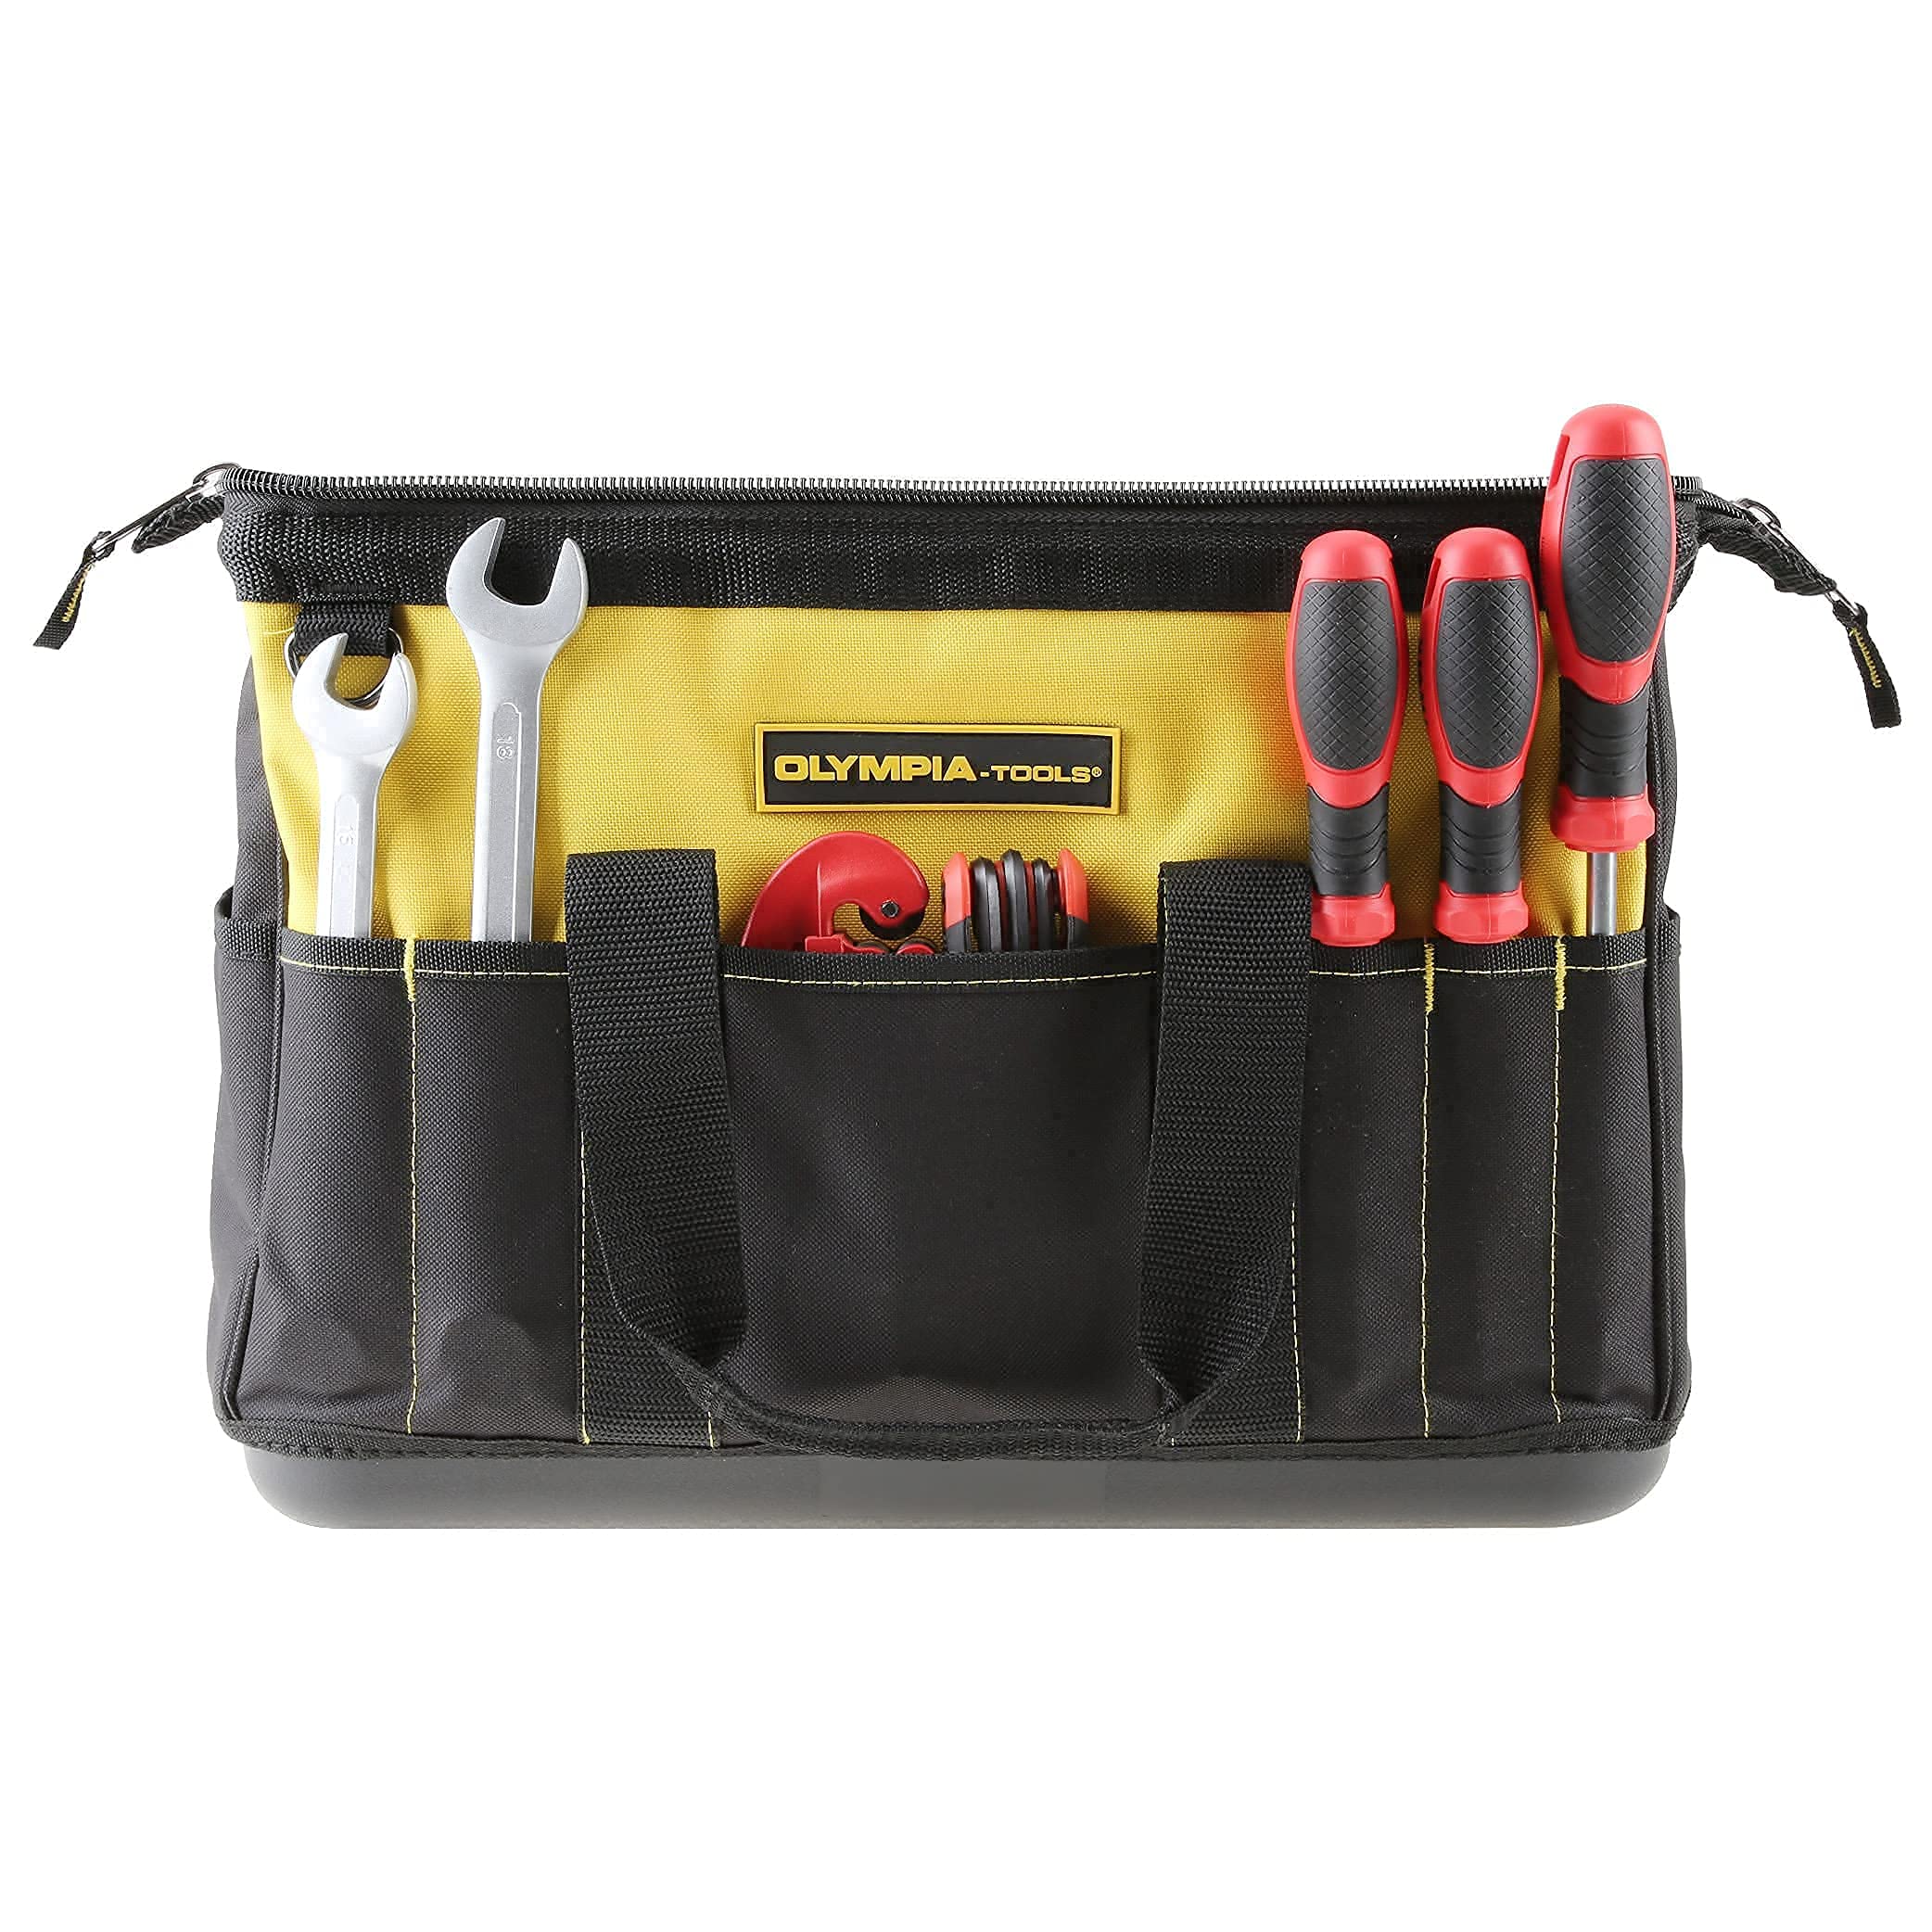 Olympia Tools 16 Inch Wide Mouth Tool Bag, Molded Waterproof Base with 21 Pockets and 7 Belt Loops, Padded Handle, Adjustable Shoulder Strap